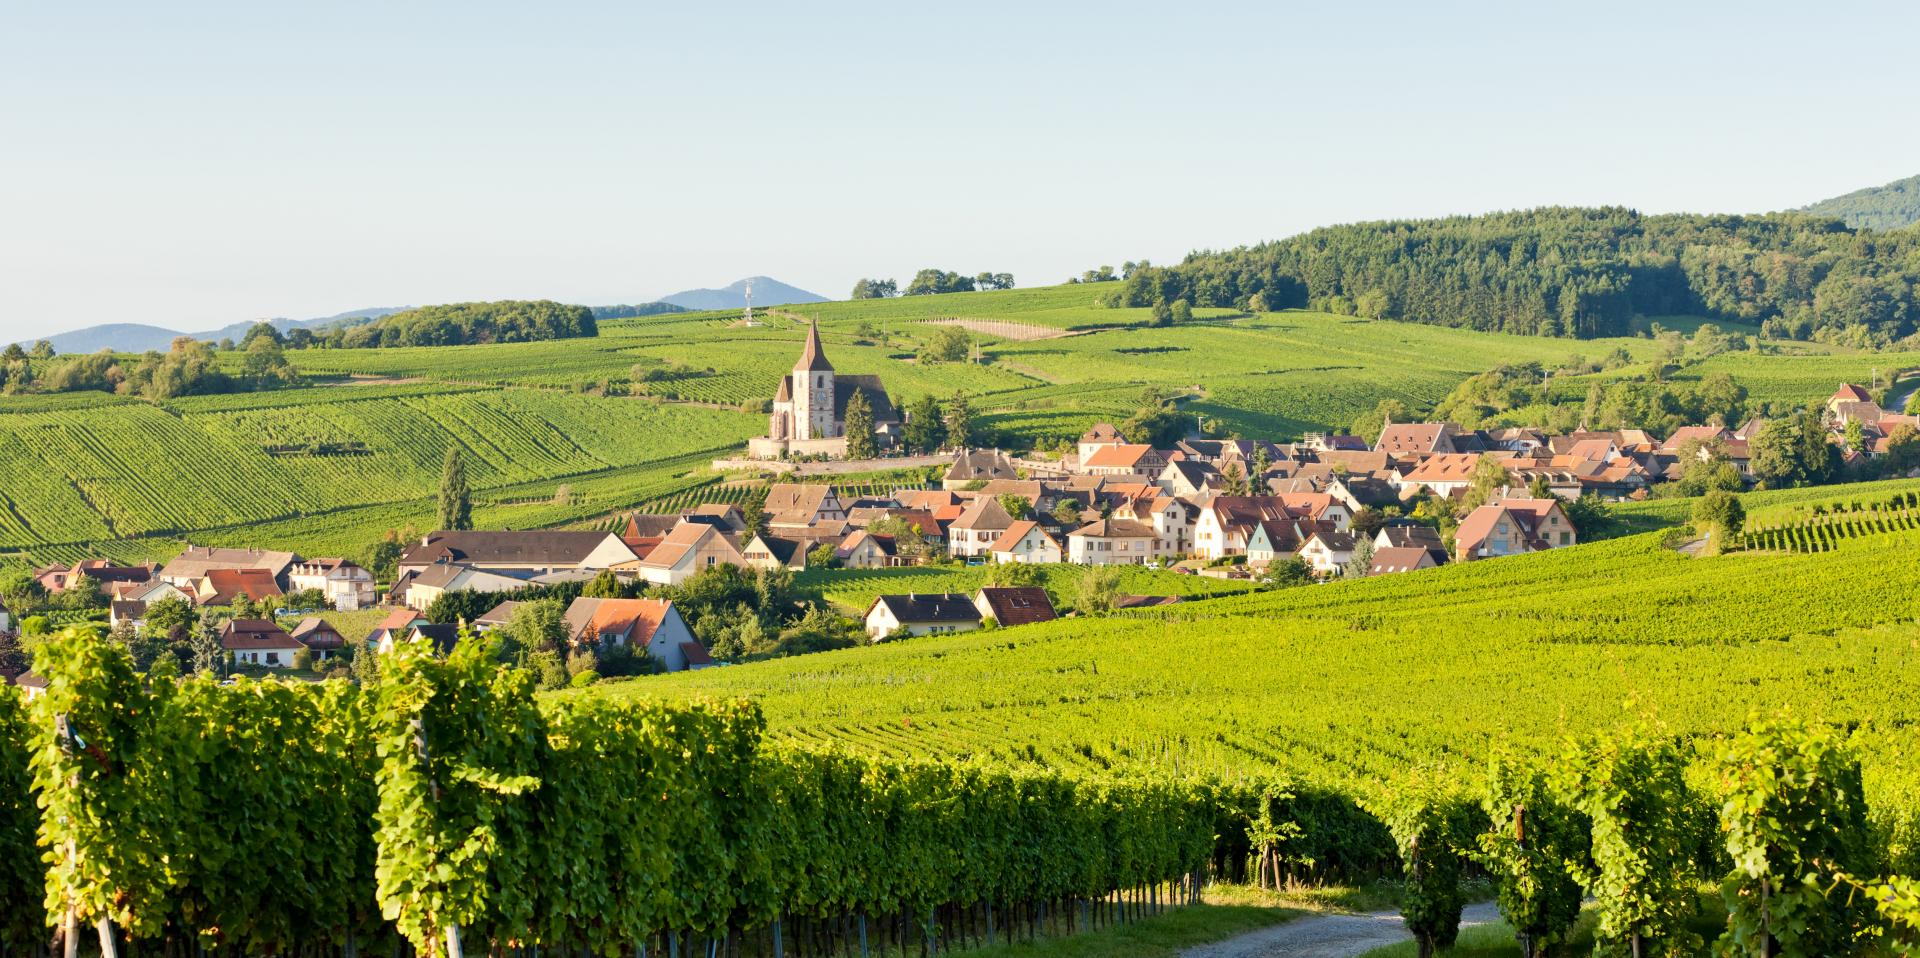 View of a village in a vineyard environment